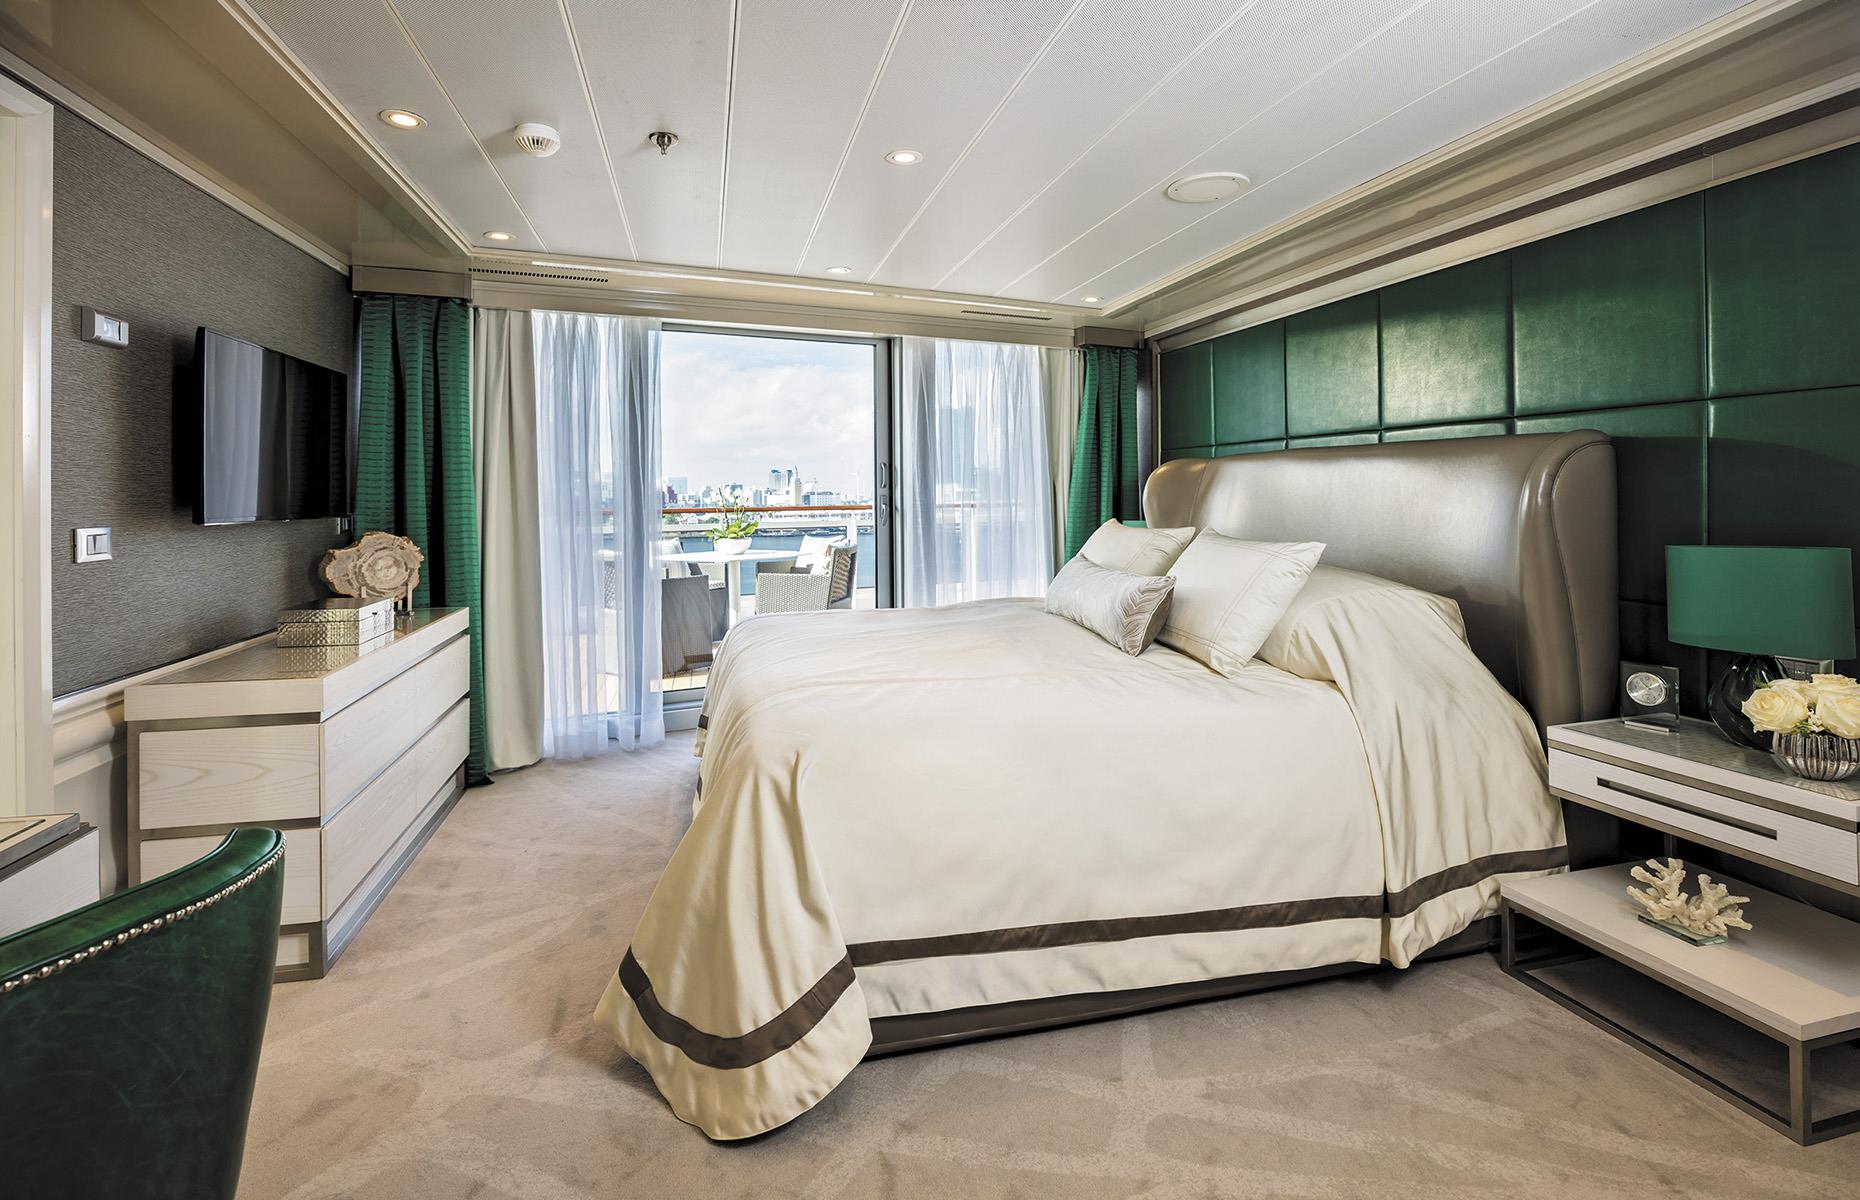 <p>We’re increasingly seeing bigger budgets for ships’ decor. Huge amounts of cash are being splashed on sprucing up interiors, and one example of this decadence is <a href="https://www.rssc.com">Regent Seven Seas Cruises</a>' Seven Seas Explorer, which has 473 Swedish-designed chandeliers, 45,876 square feet (4,262sqm) of marble, Versace-designed dinnerware, crystal glasses from Eastern Europe and a £10 million art collection which includes several Picassos.</p>